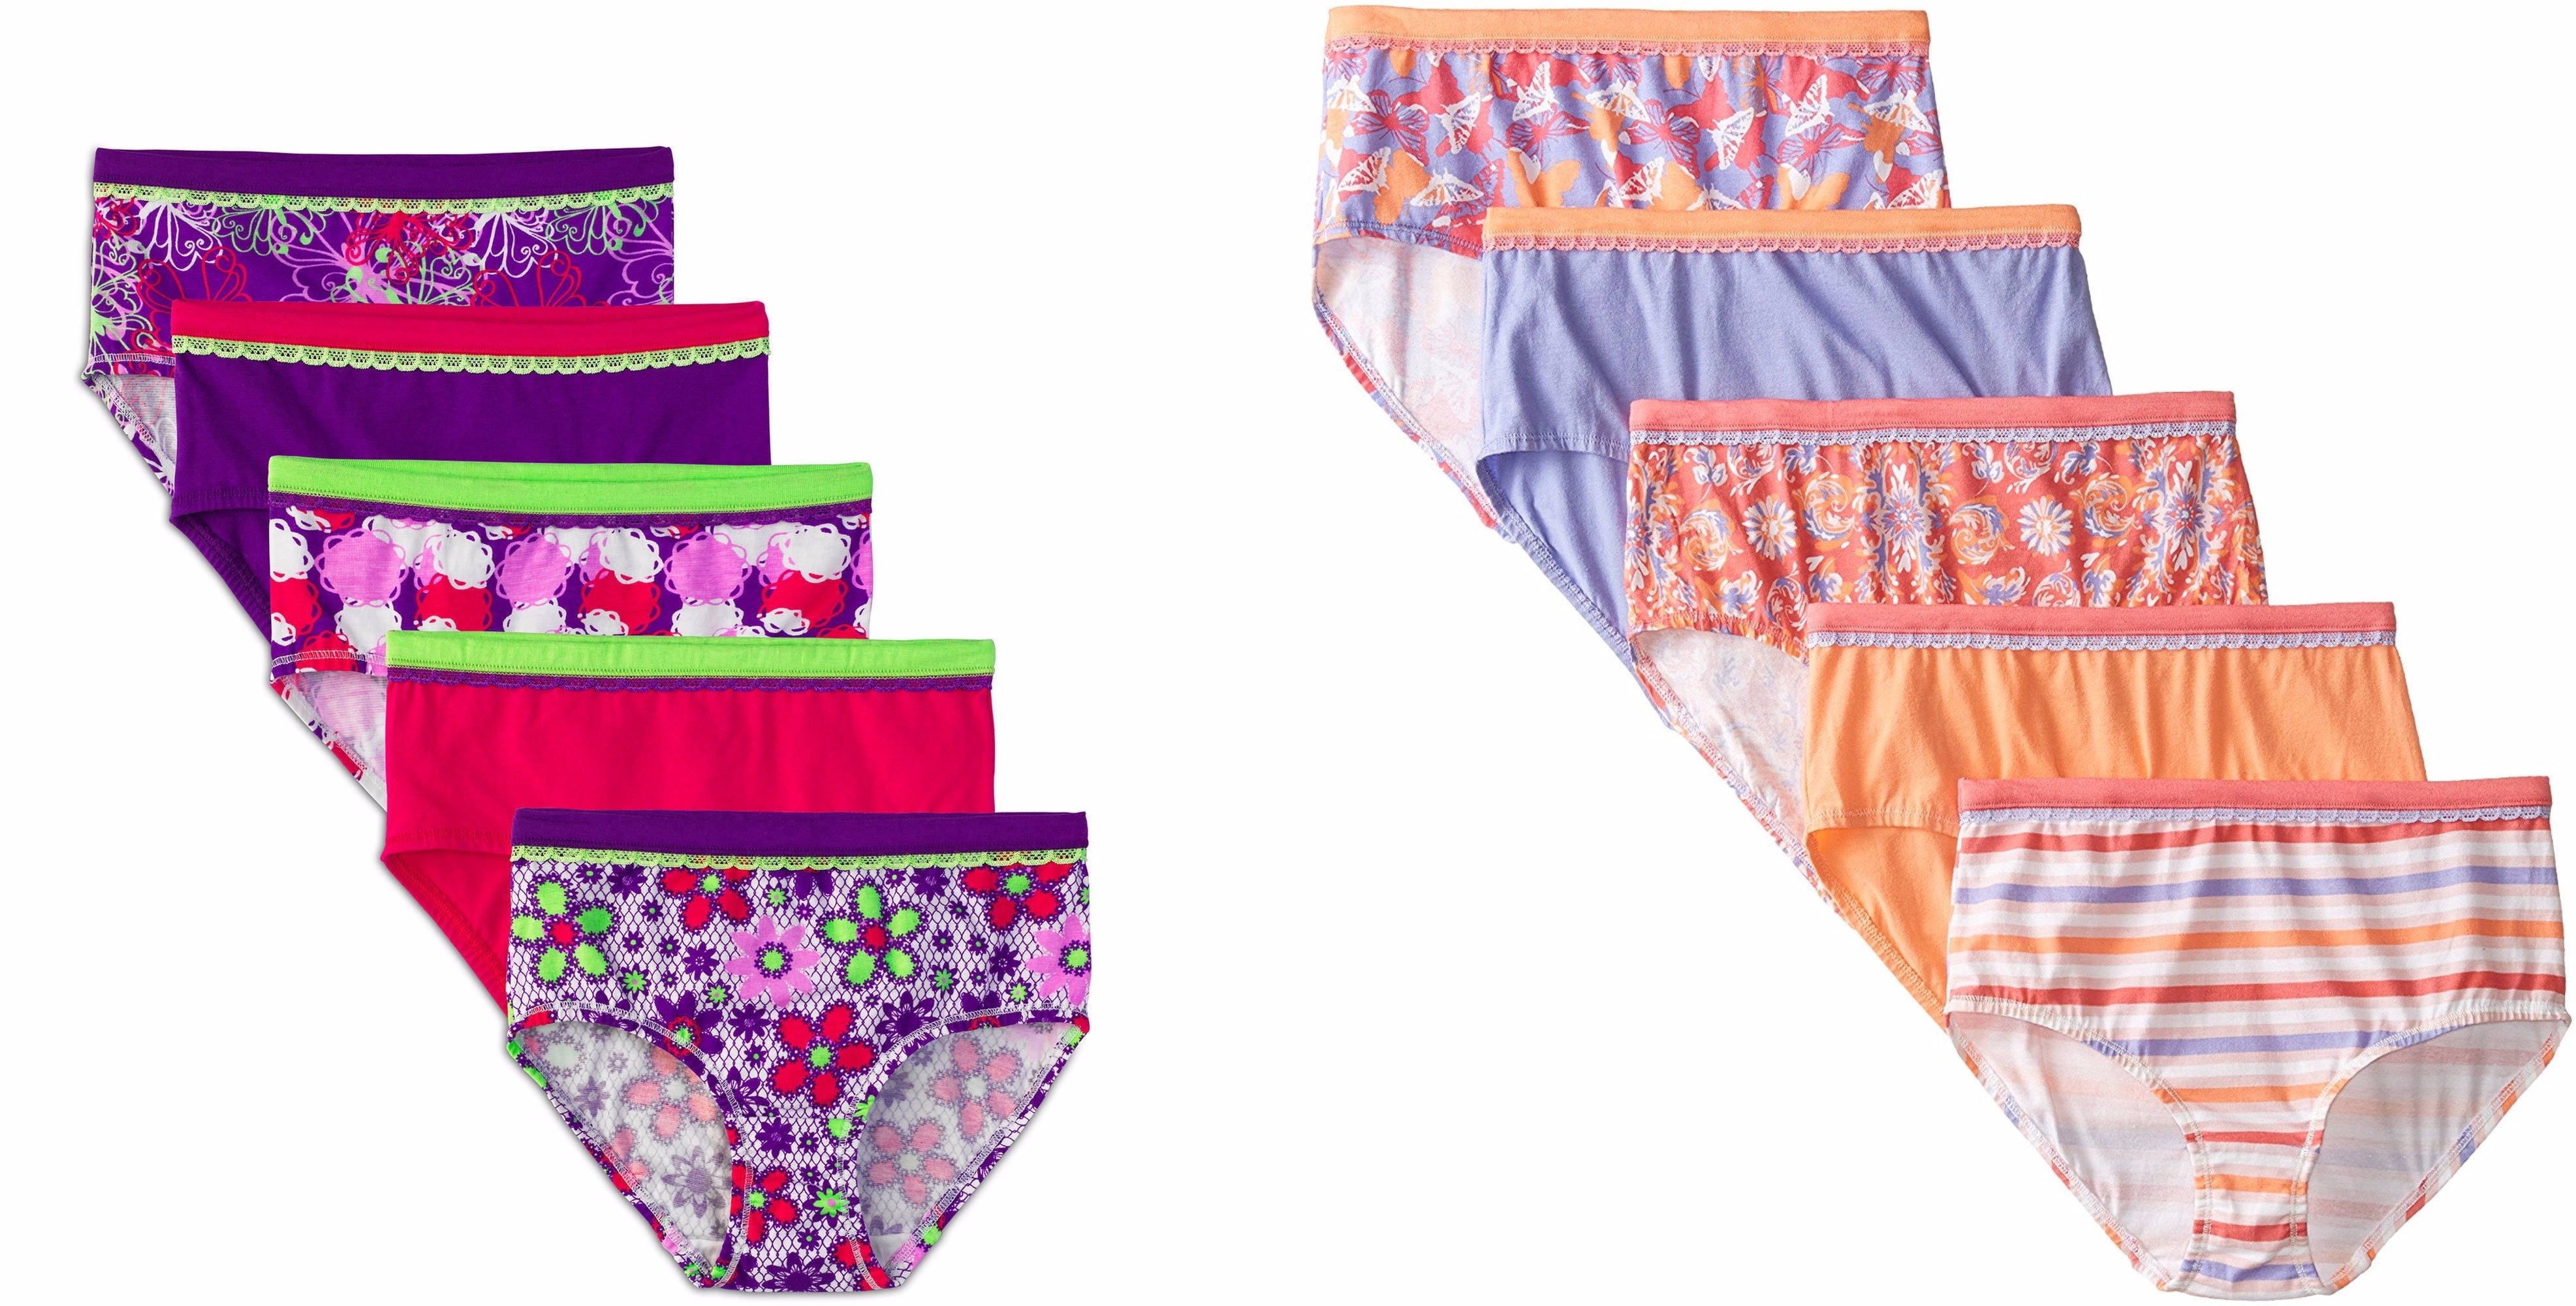 Girls' Cotton Stretch Brief Panties, 5 Pack Assortment May Vary - image 1 of 3